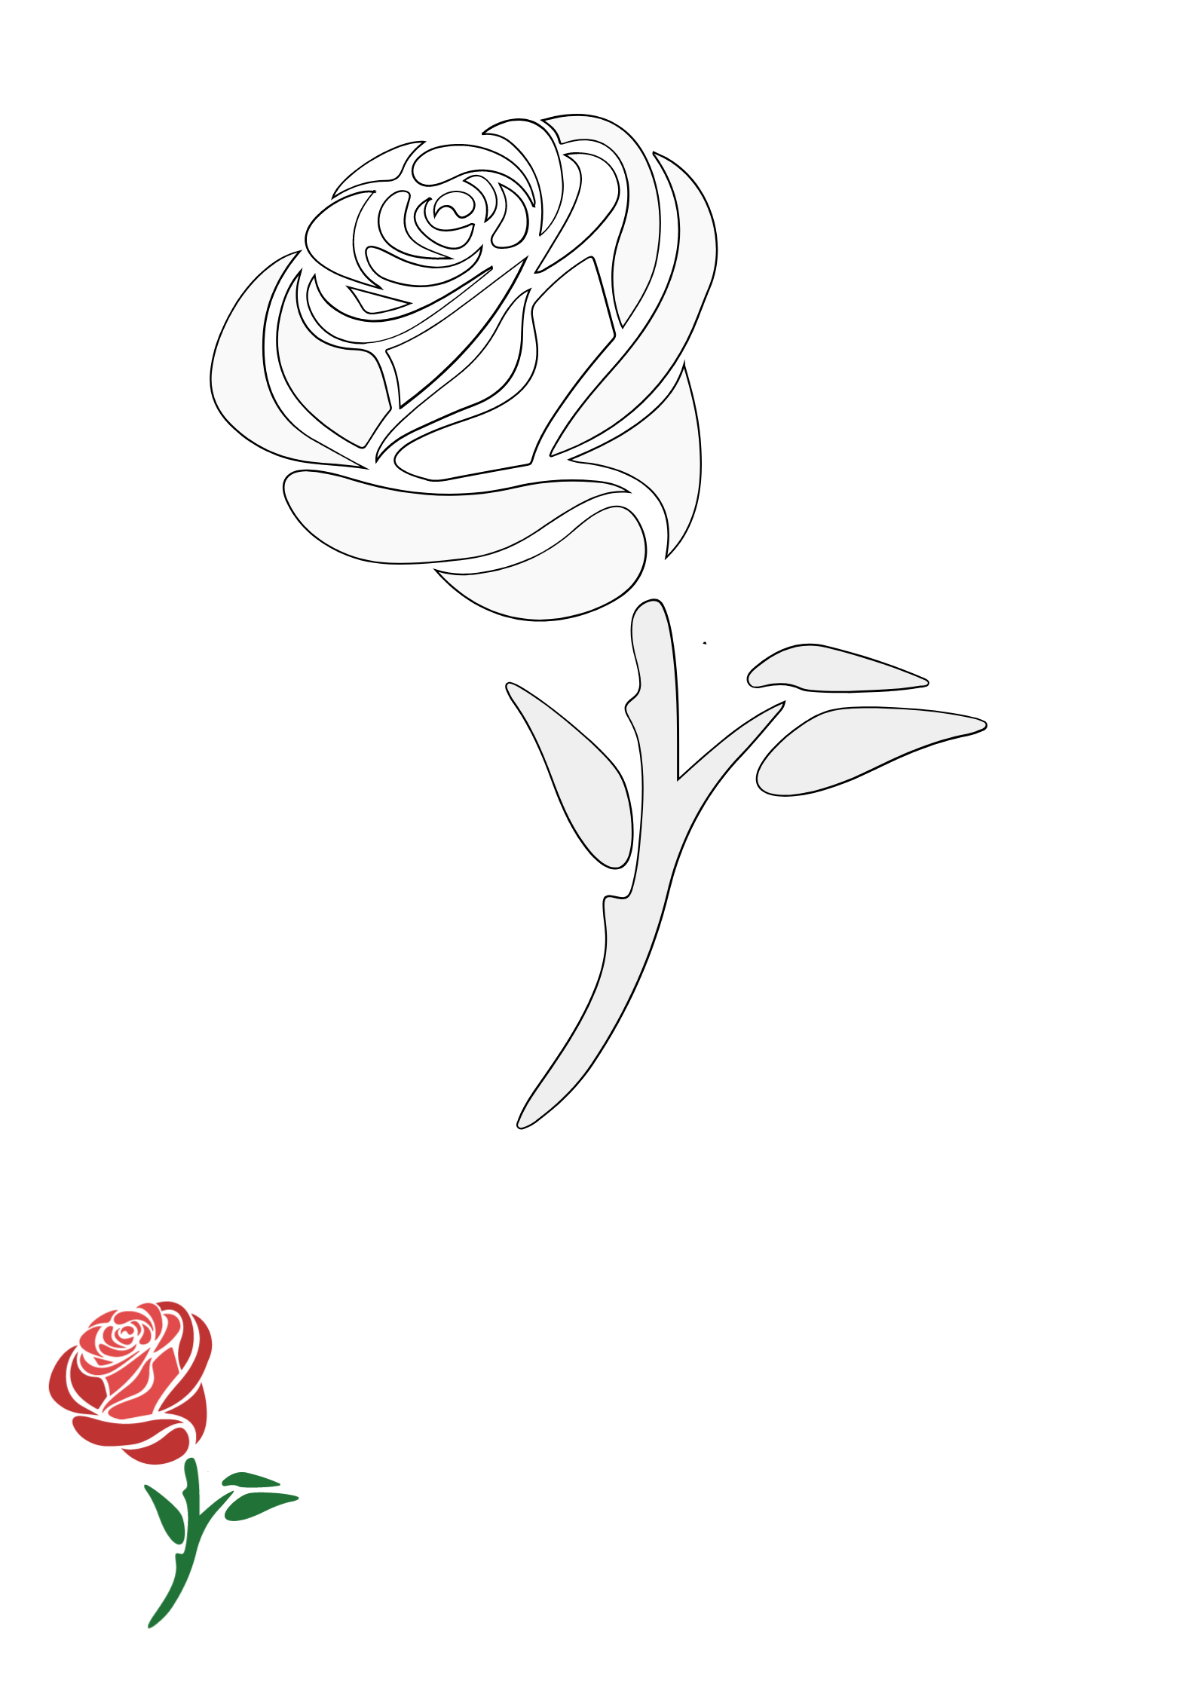 Rose Flower Coloring Page Template